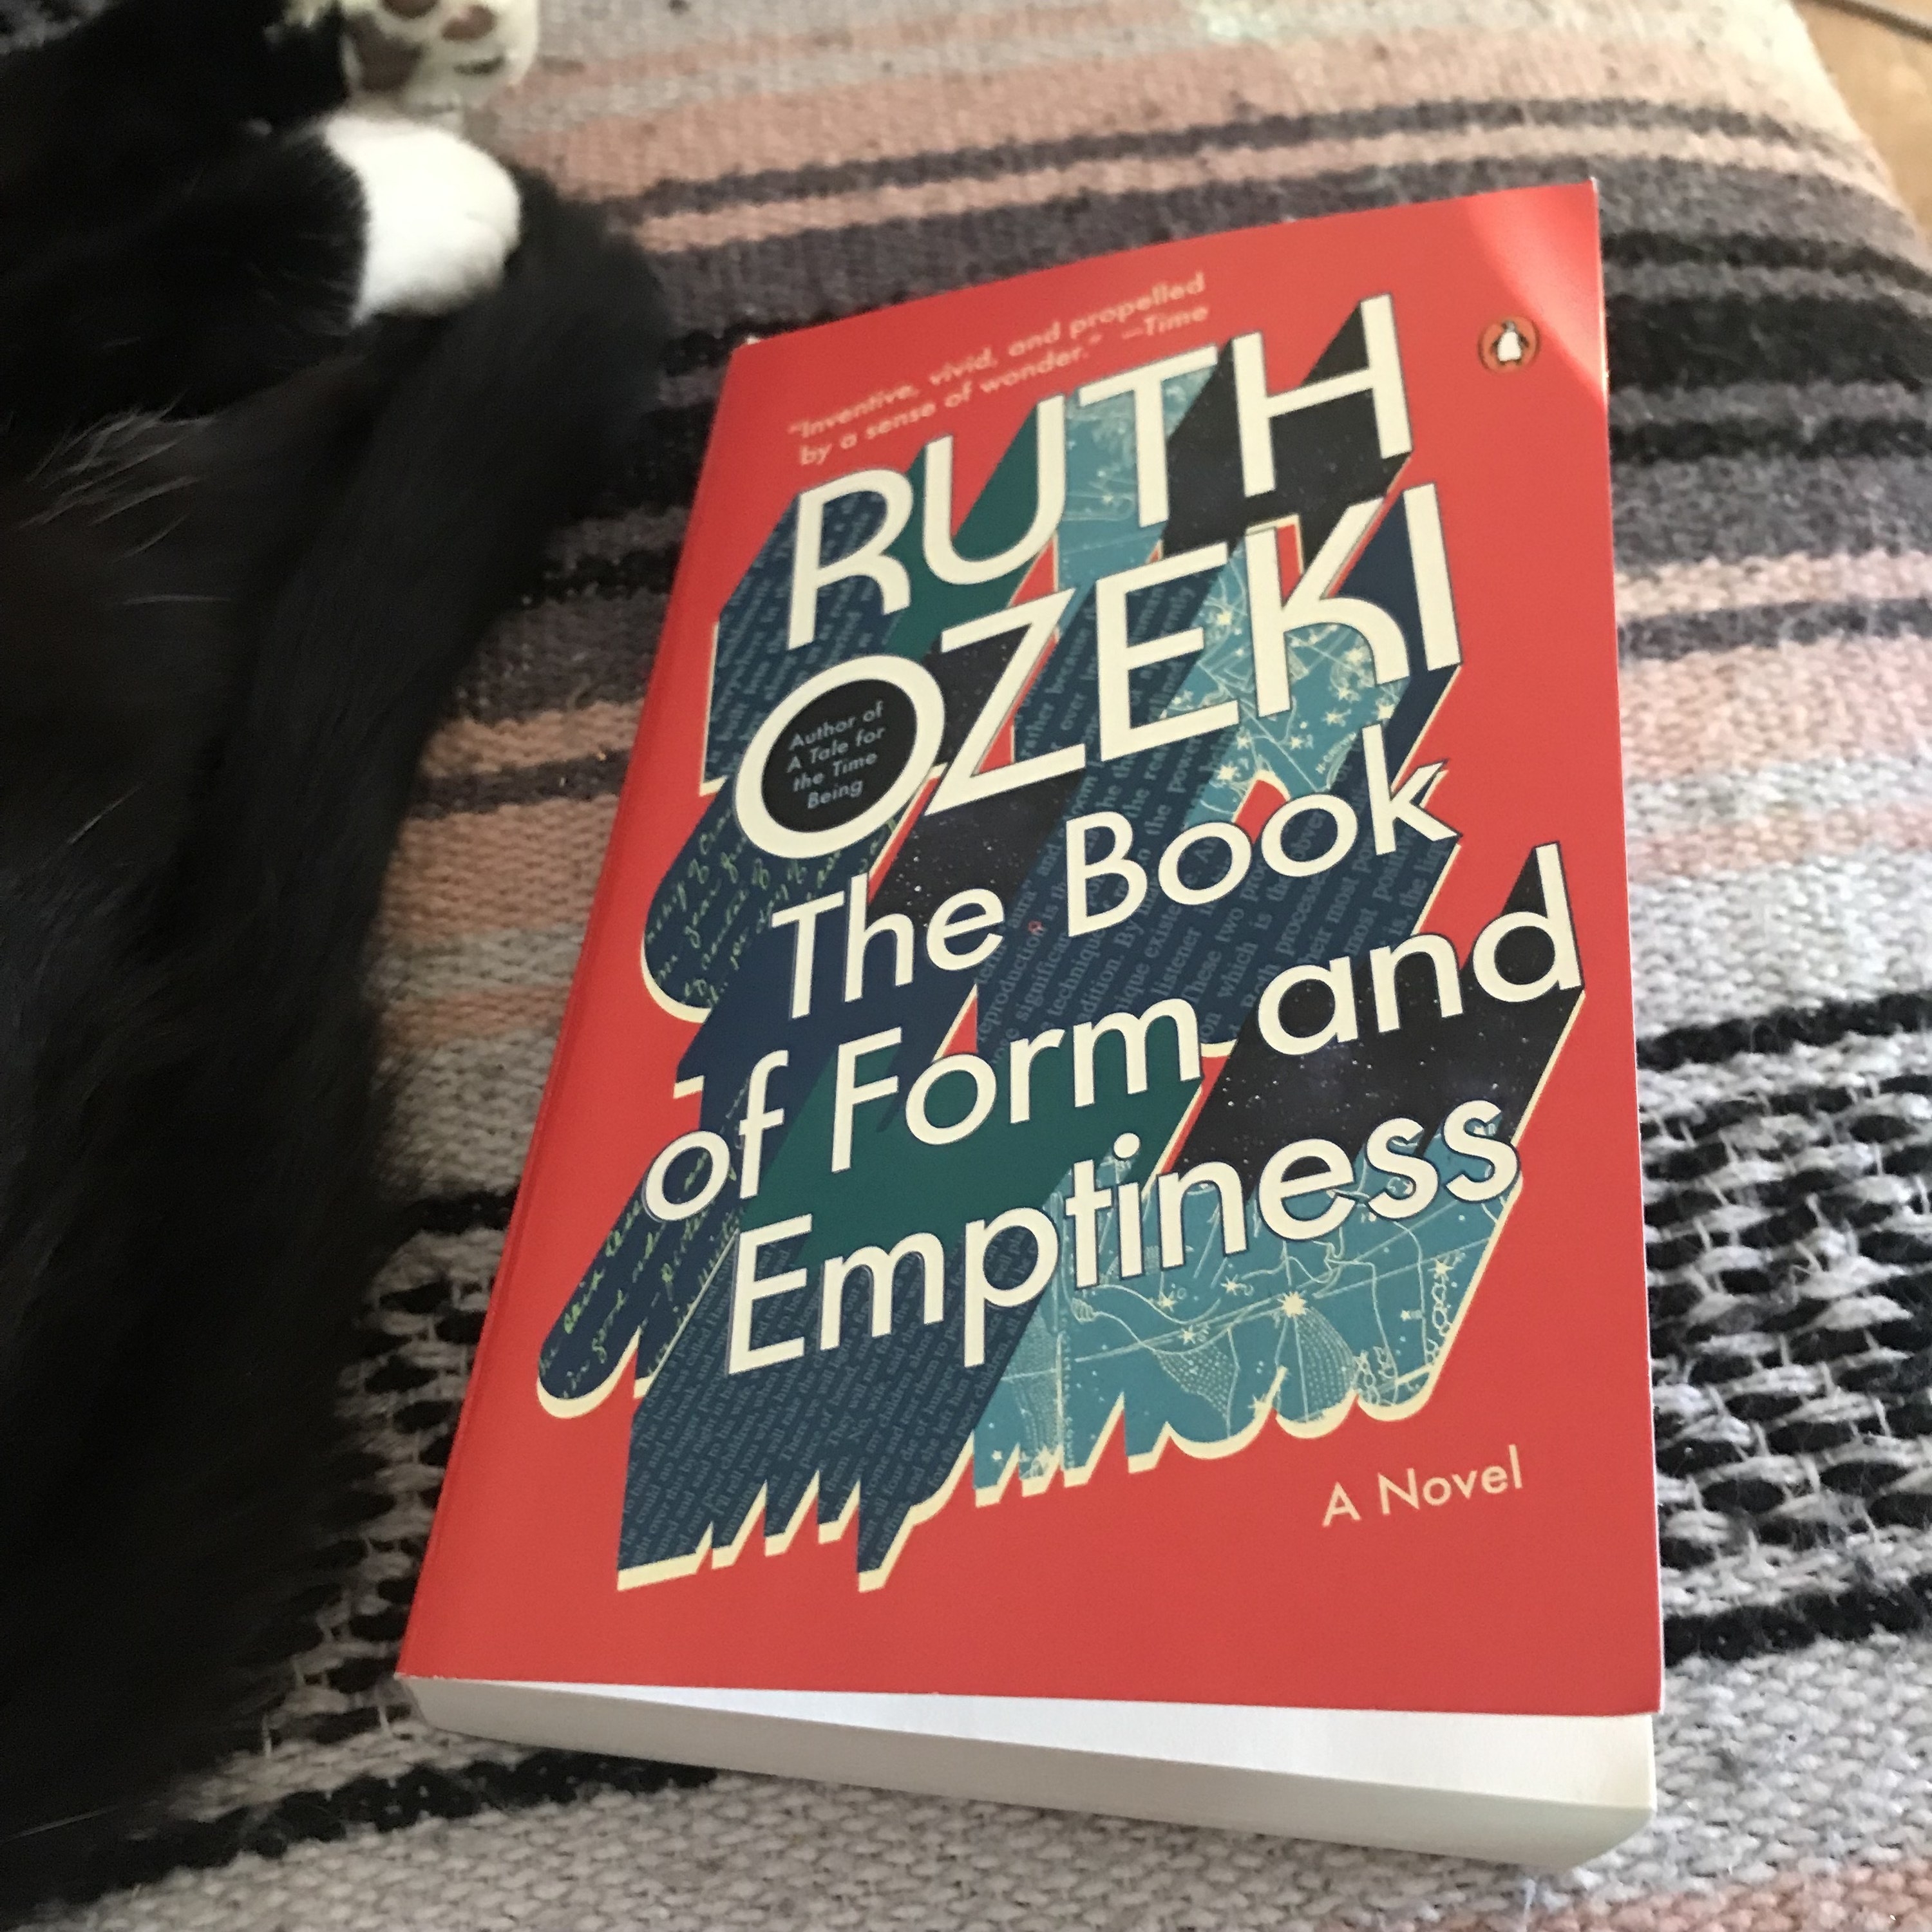 the book of form and emptiness by ruth ozeki